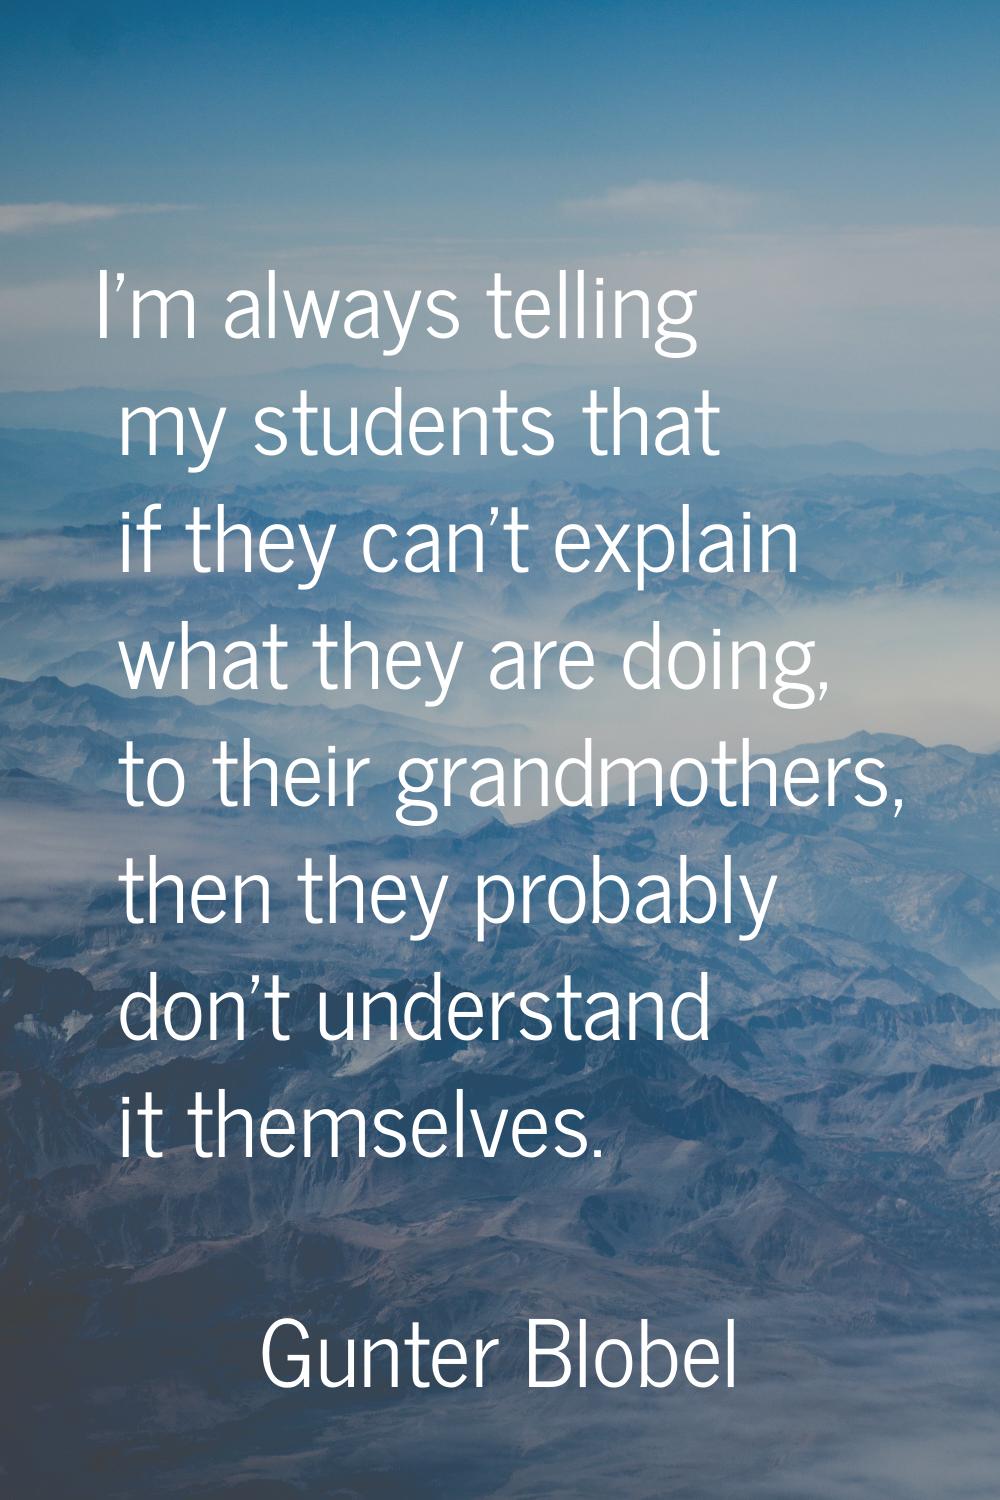 I'm always telling my students that if they can't explain what they are doing, to their grandmother